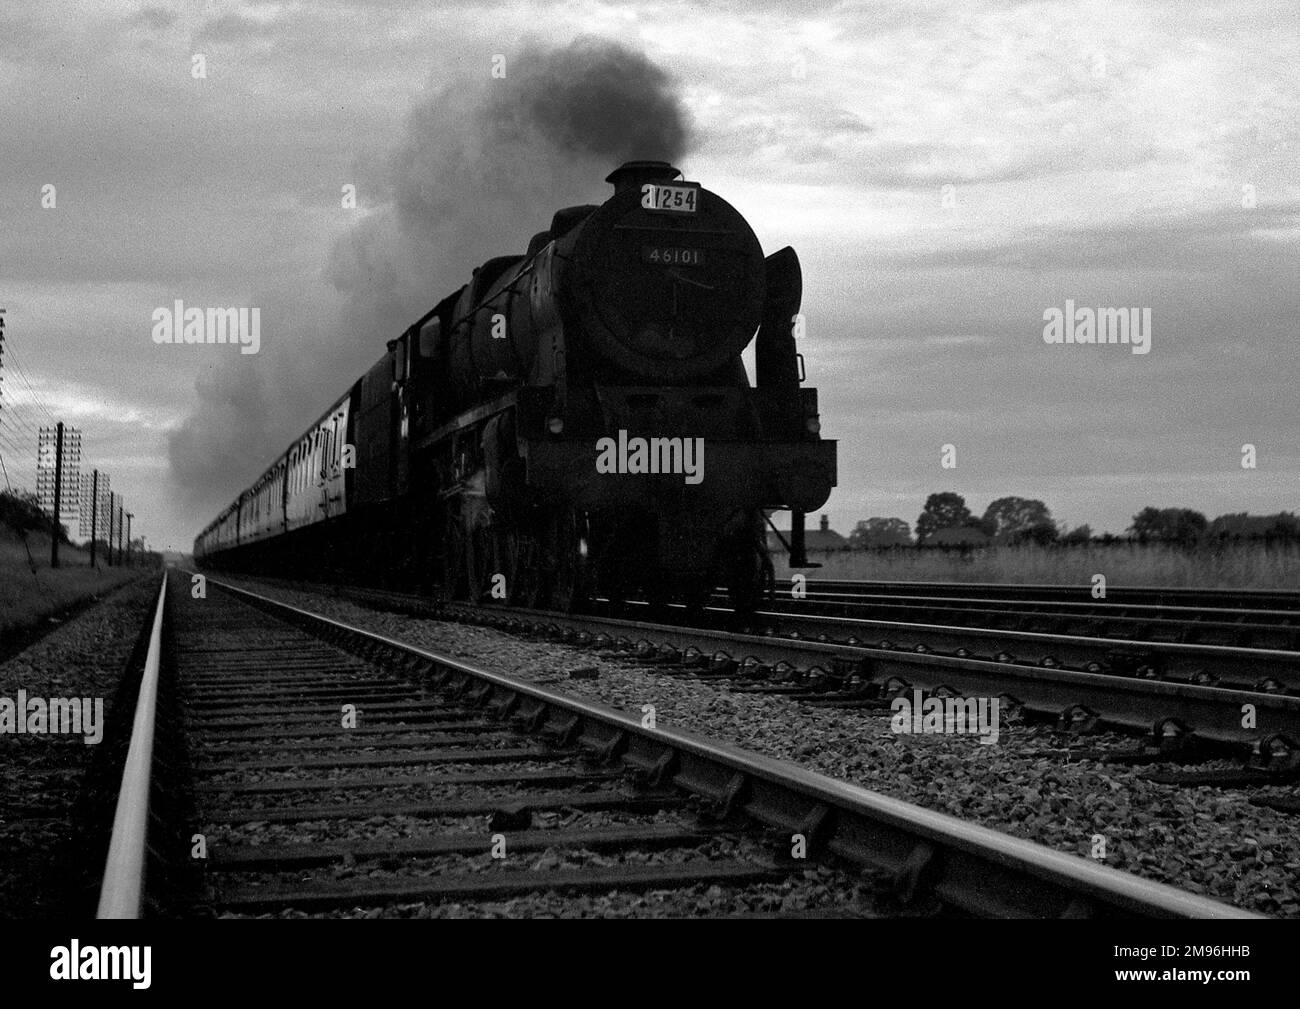 A steam train in motion, seen from ground level. Stock Photo